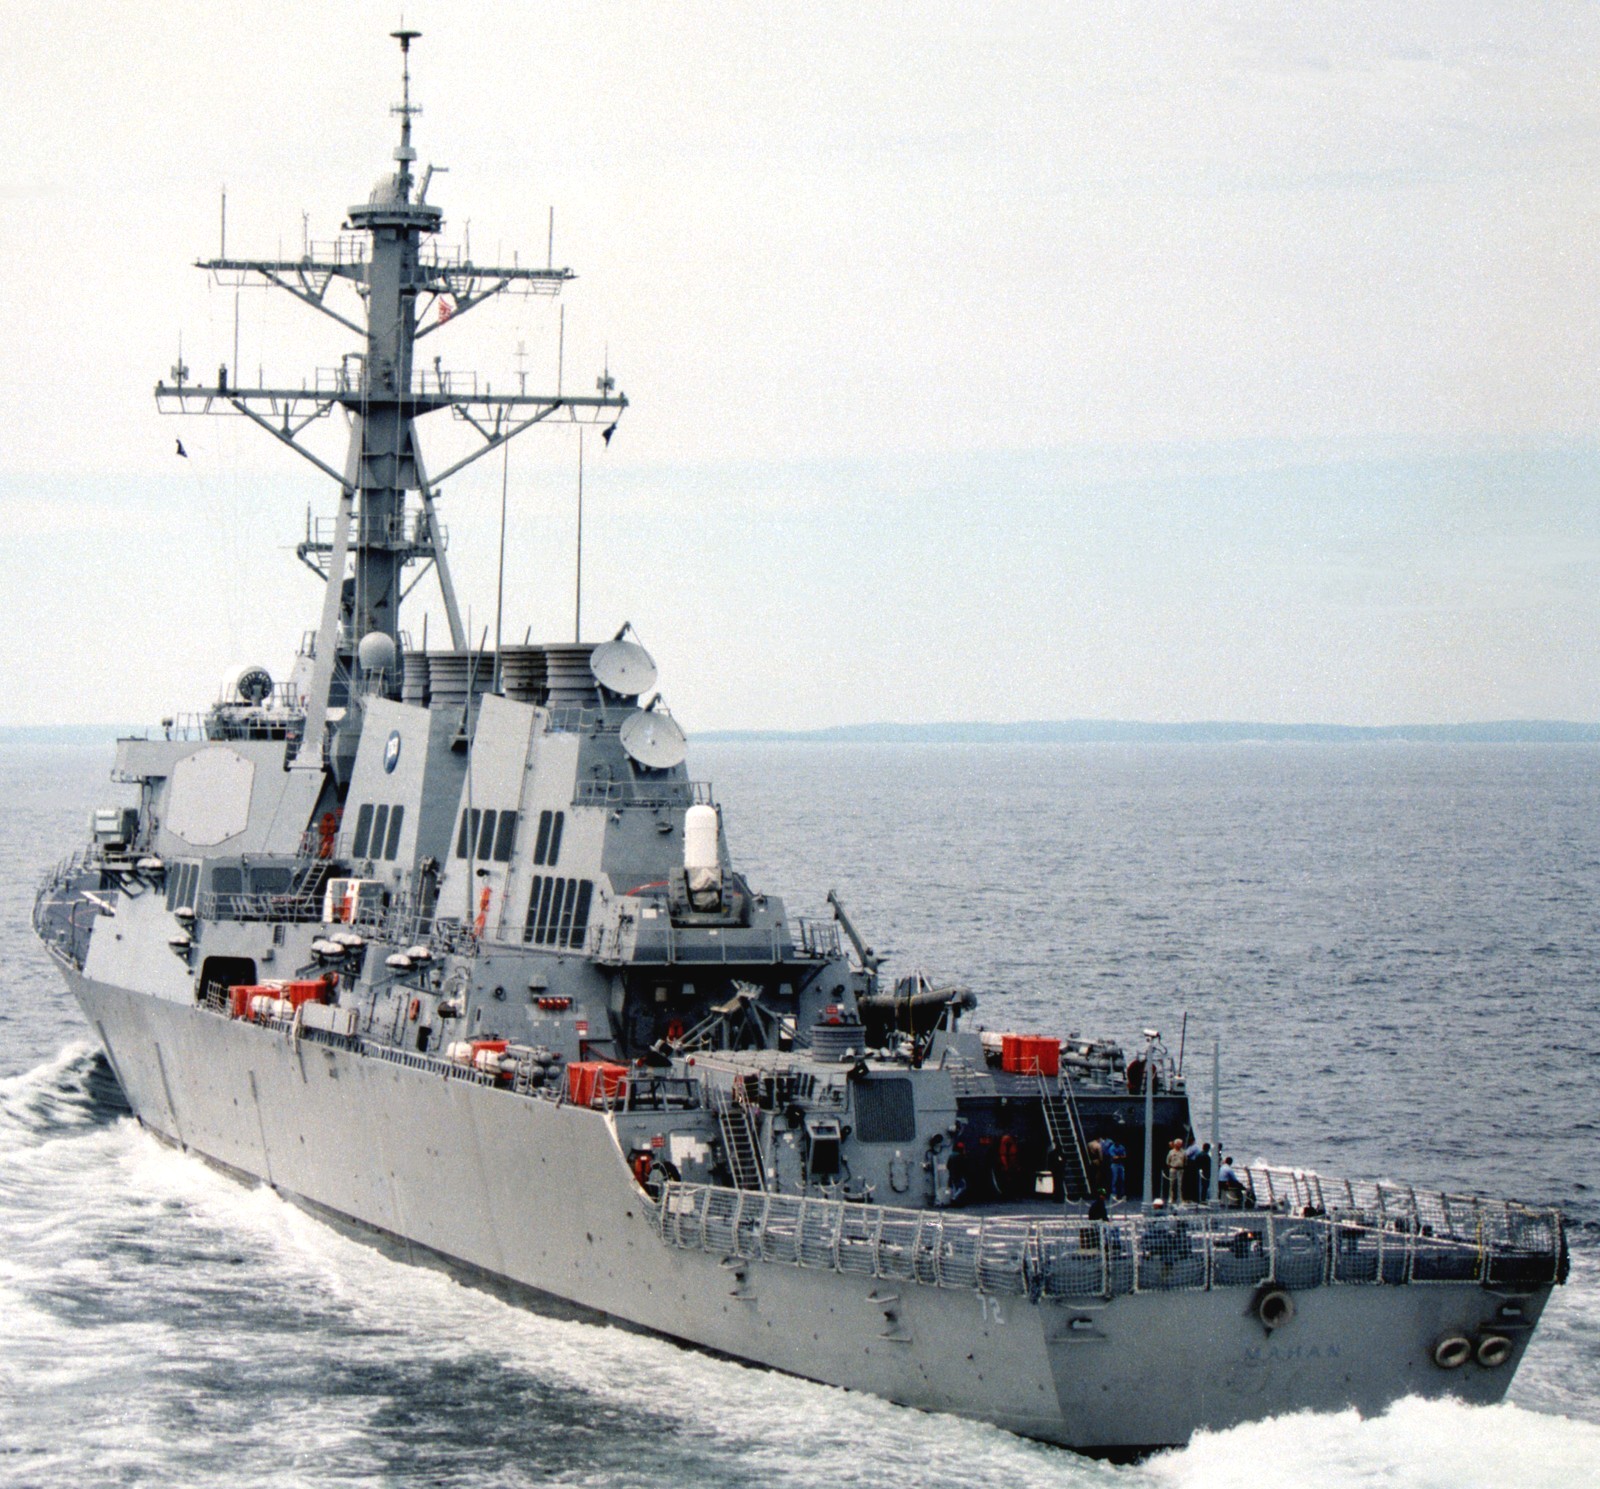 ddg-72 uss mahan guided missile destroyer arleigh burke class aegis bmd 48